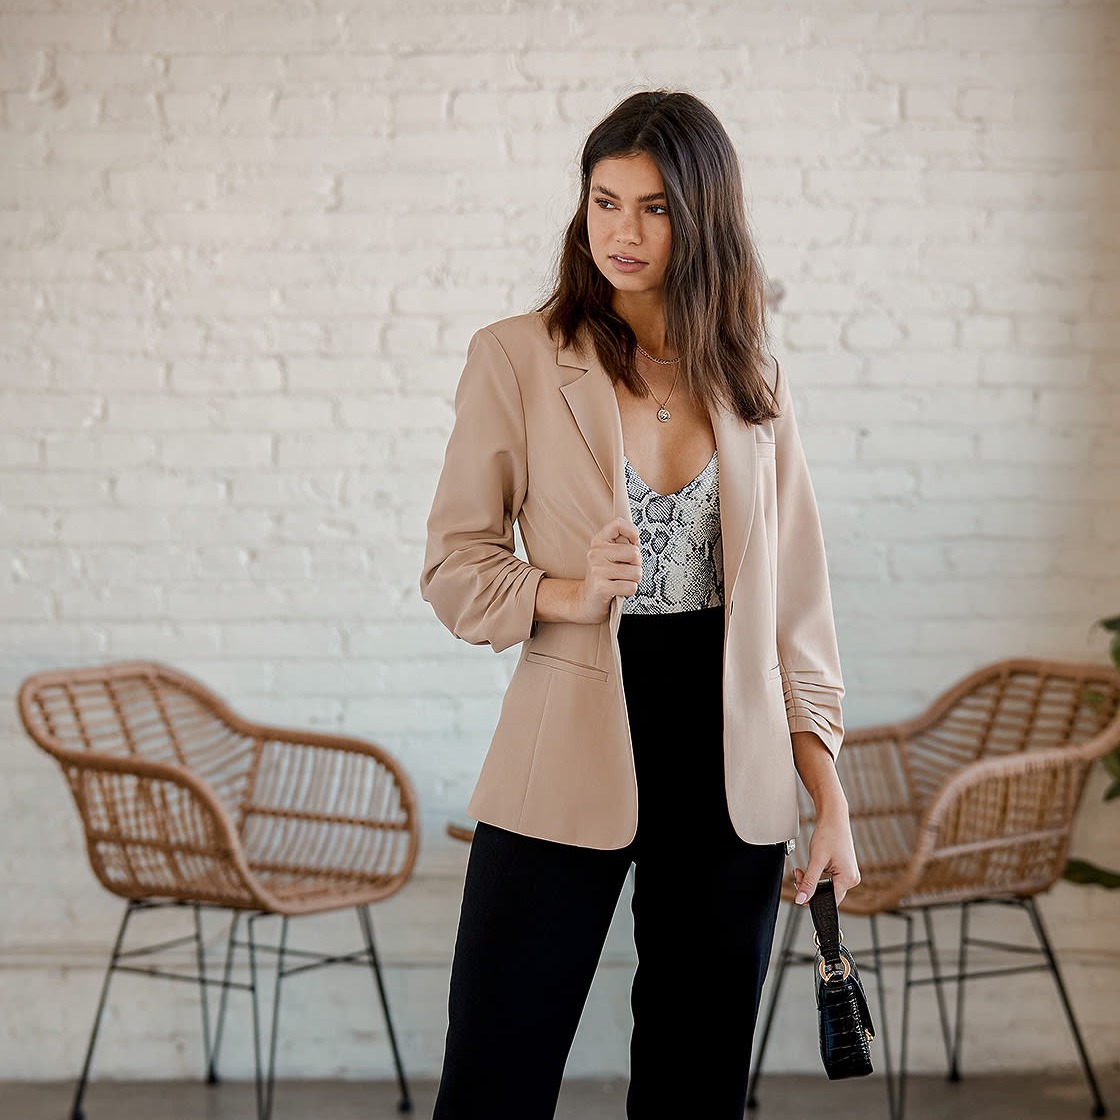 3 Tips on Office Appropriate Women Suits - Lil bits of Chic